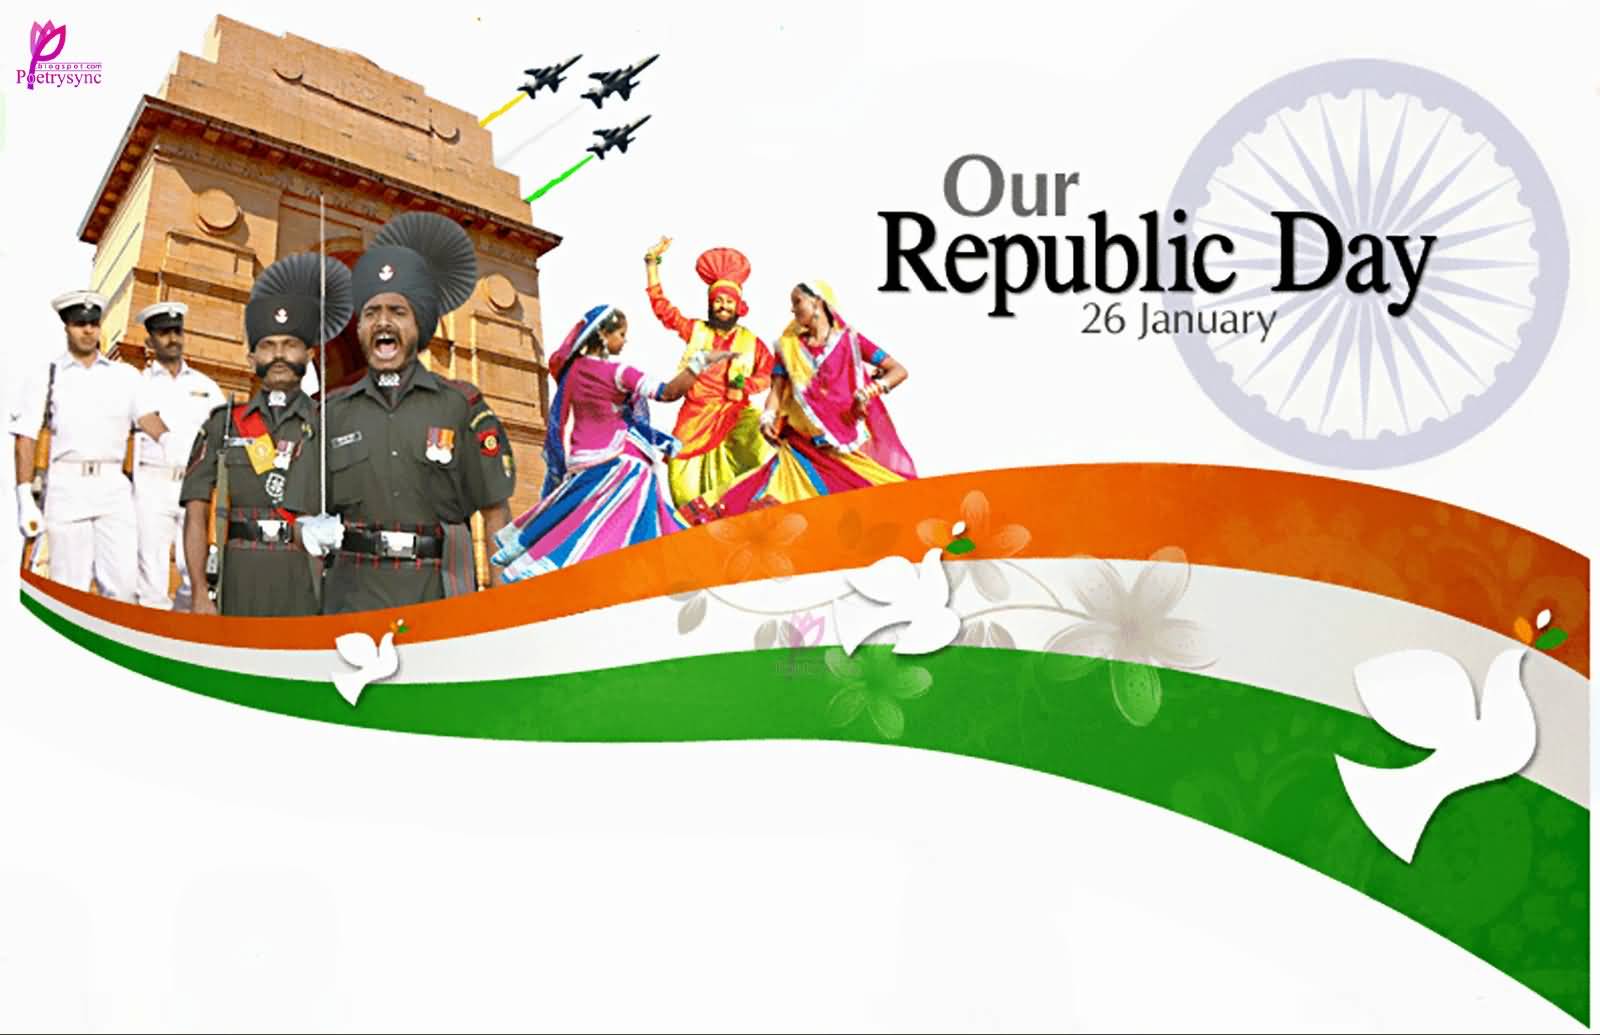 Our Republic Day 26 January